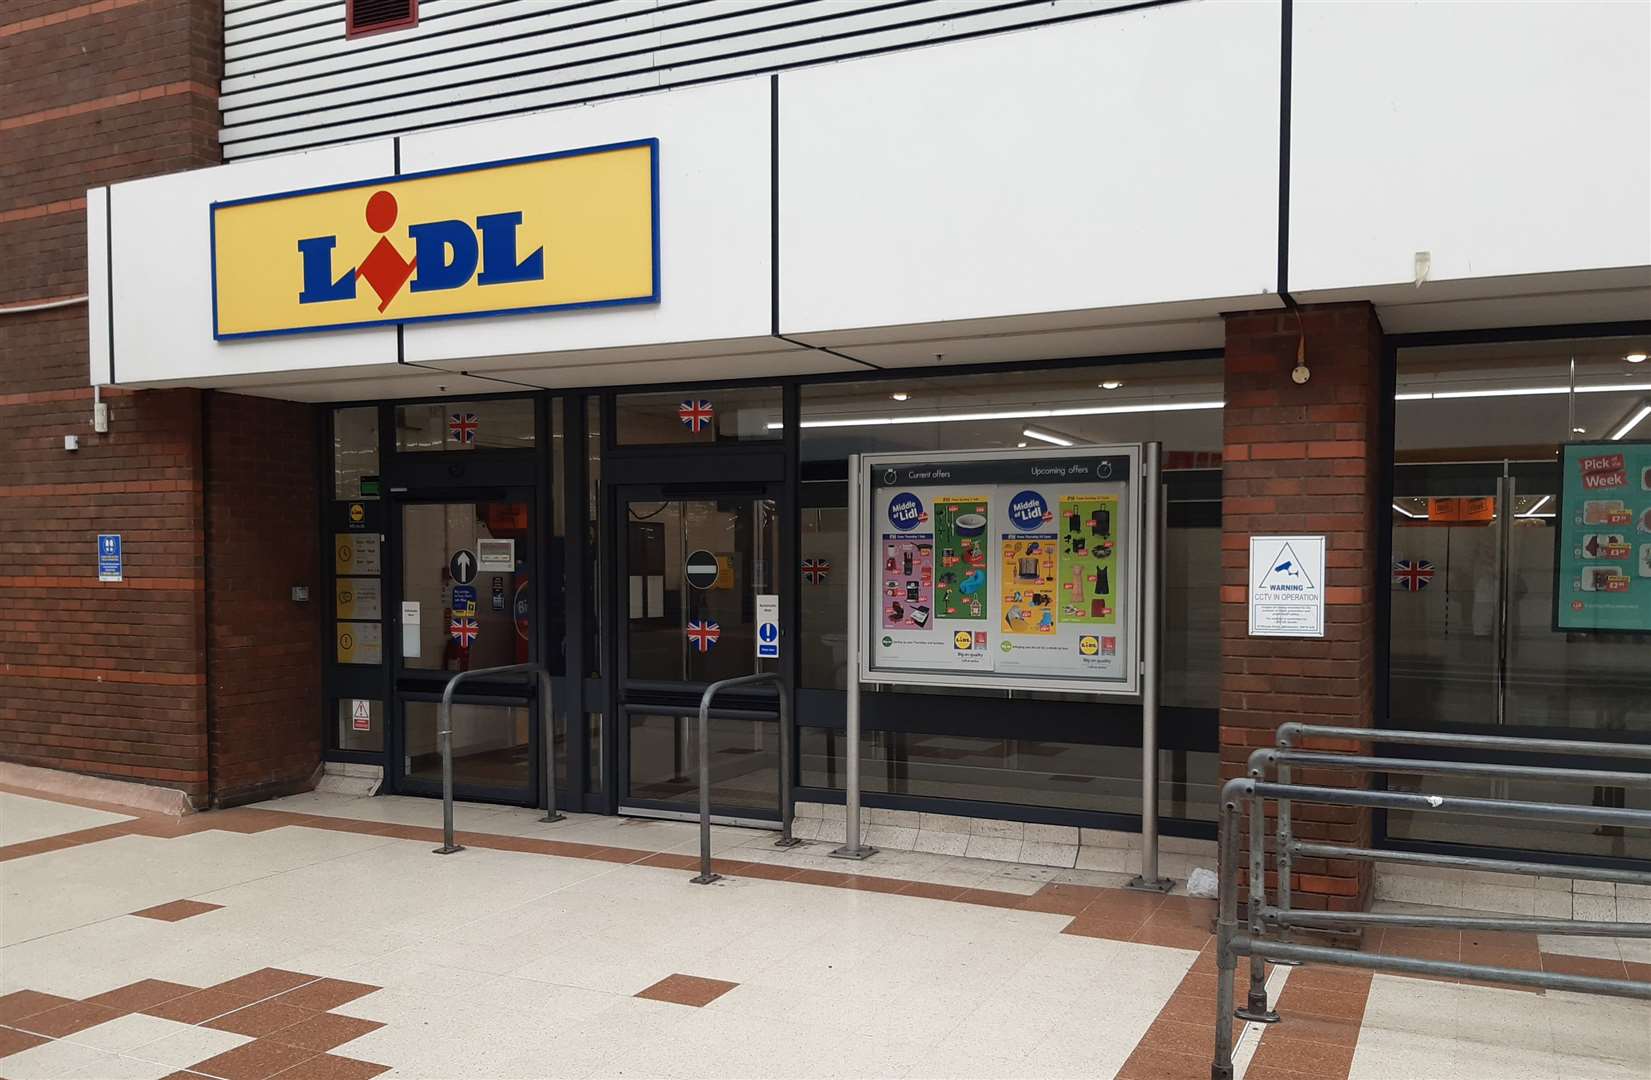 Lidl was the last store to leave in November